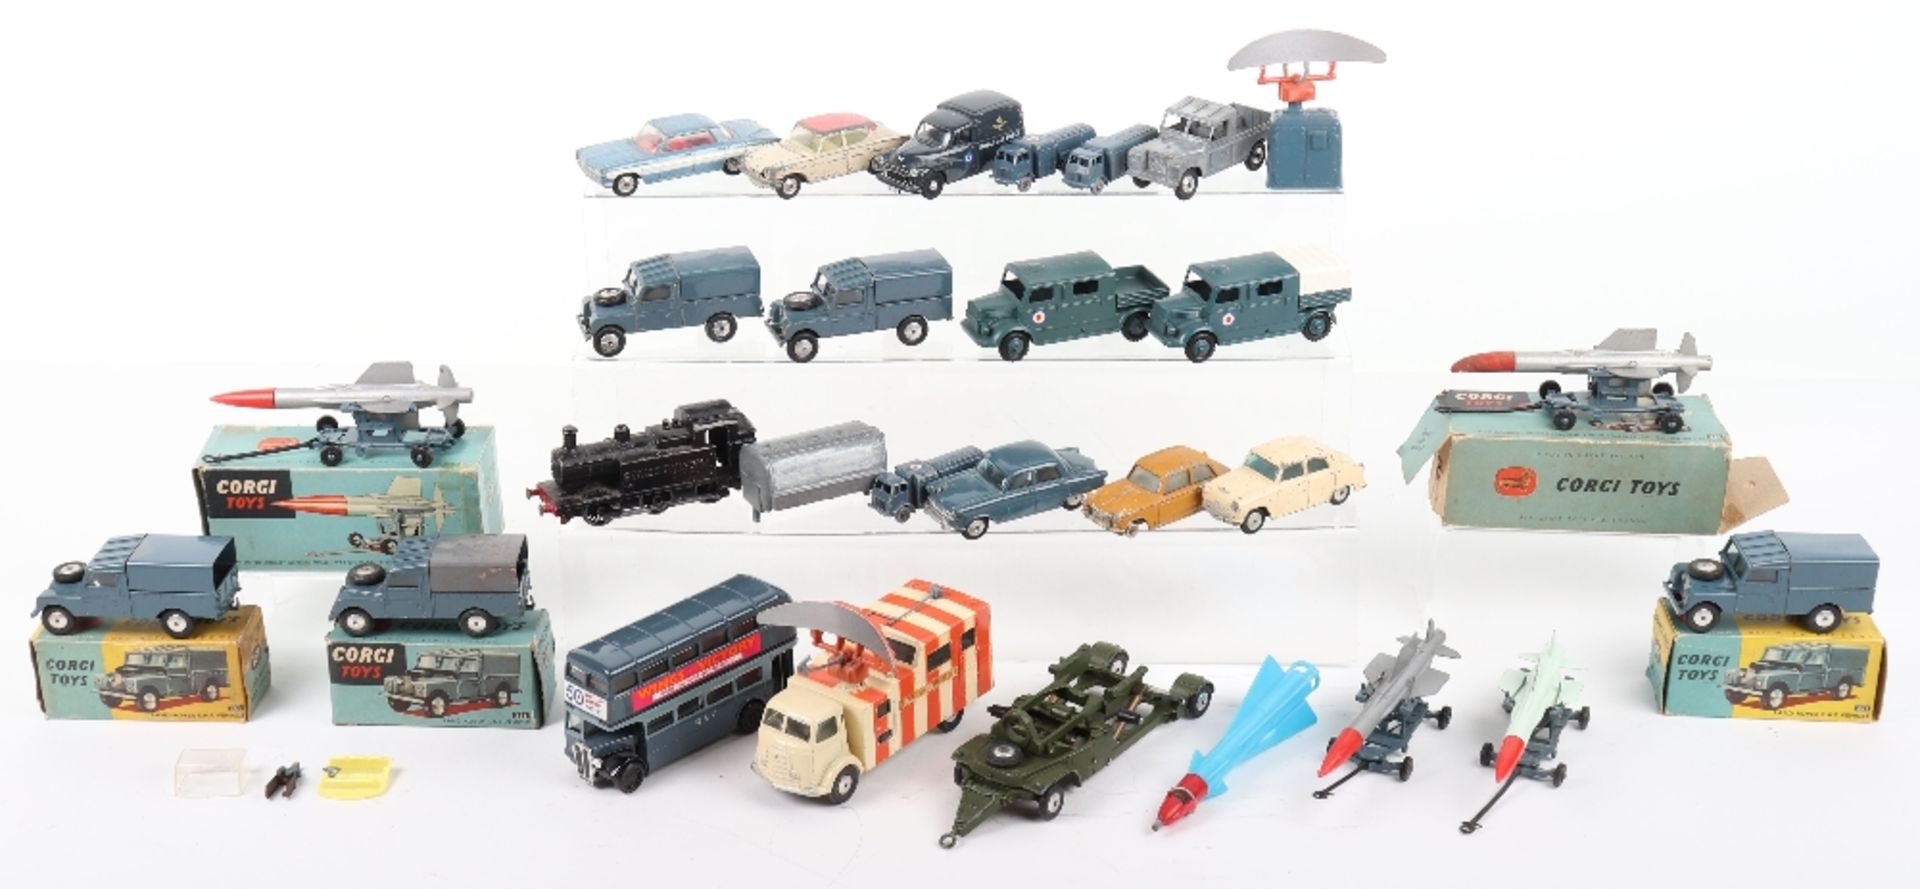 Corgi Toys and other R.A.F vehicles